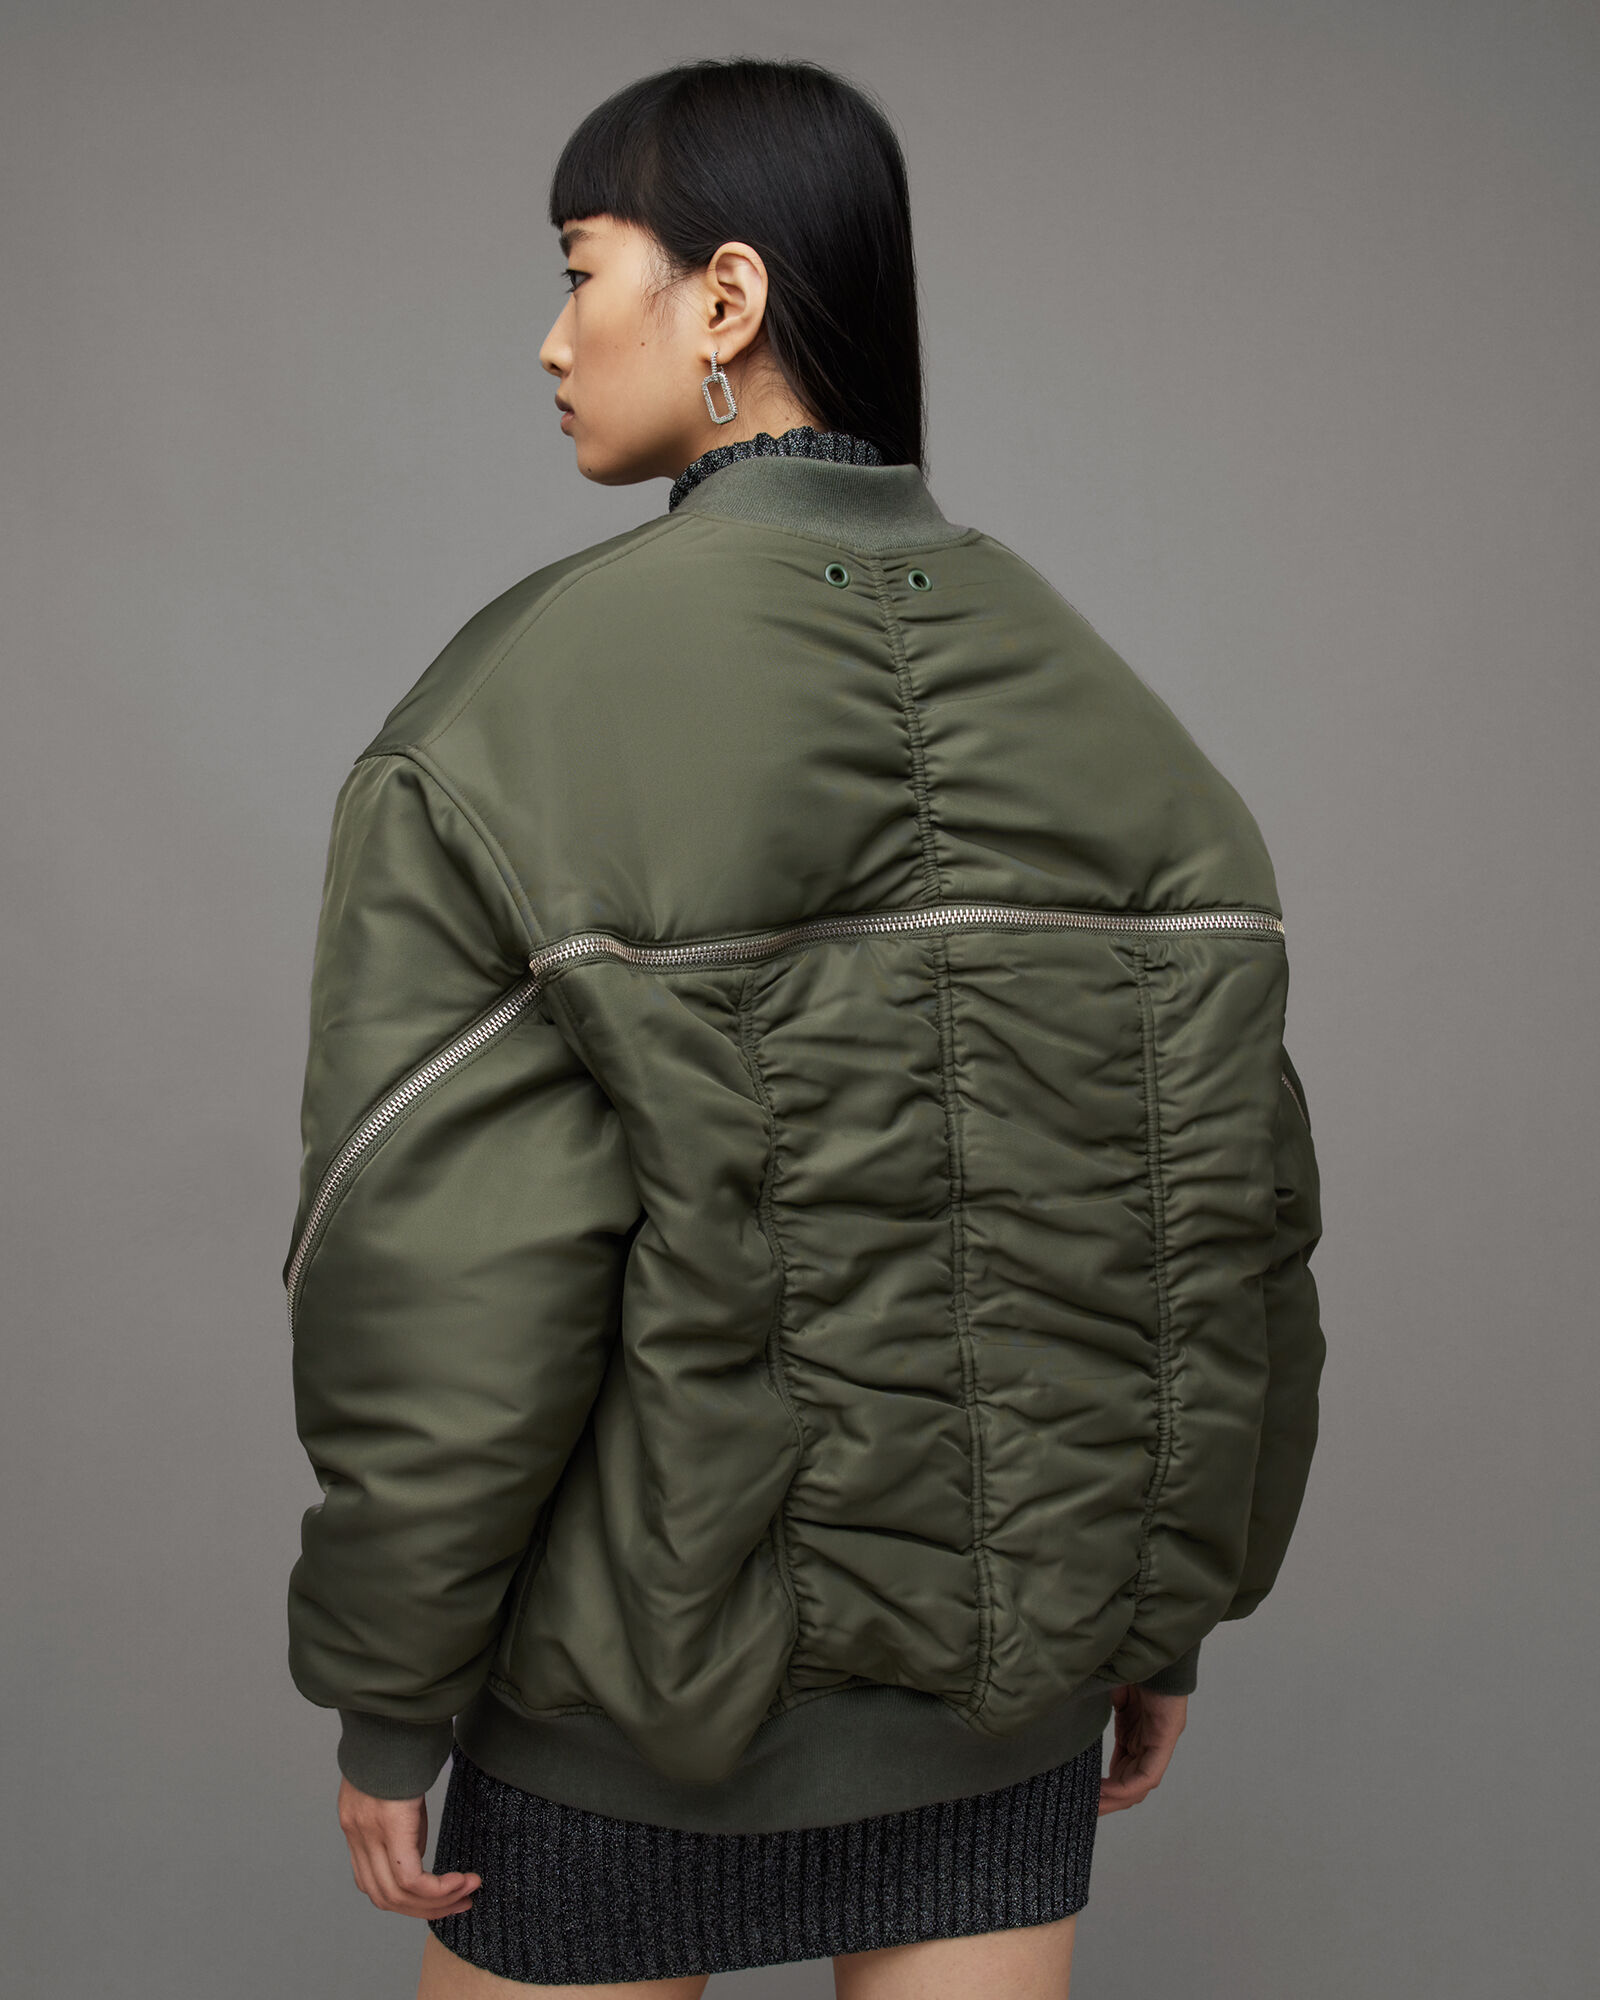 A-2 cropped bomber jacket in green - Entire Studios | Mytheresa